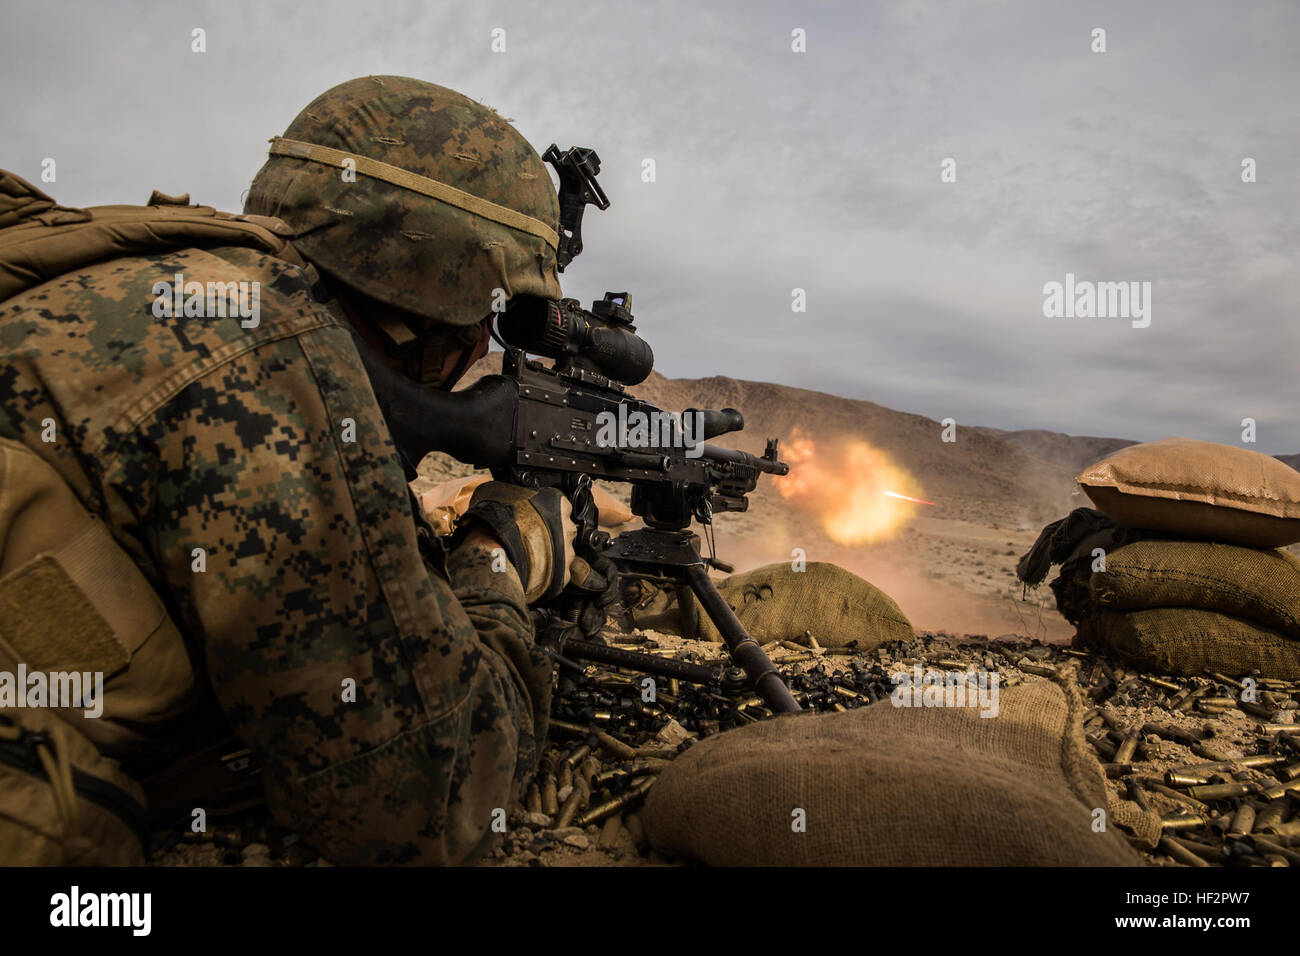 U.S. Marine Lance Cpl. Nathan Metzger engages targets during a combined arms exercise aboard Marine Corps Air Ground Combat Center, Twentynine Palms, Calif., Dec. 15, 2014. Metzger is a machine gunner with Battalion Landing Team 3rd Battalion, 1st Marine Regiment, 15th Marine Expeditionary Unit. BLT 3/1 conducted this training concurrent with the 15th MEU’s realistic urban training. RUT prepares the 15th MEU’s Marines for their upcoming deployment, enhancing their combat skills in environments similar to those they may find in future missions. (U.S. Marine Corps Photo by Sgt. Emmanuel Ramos/Re Stock Photo